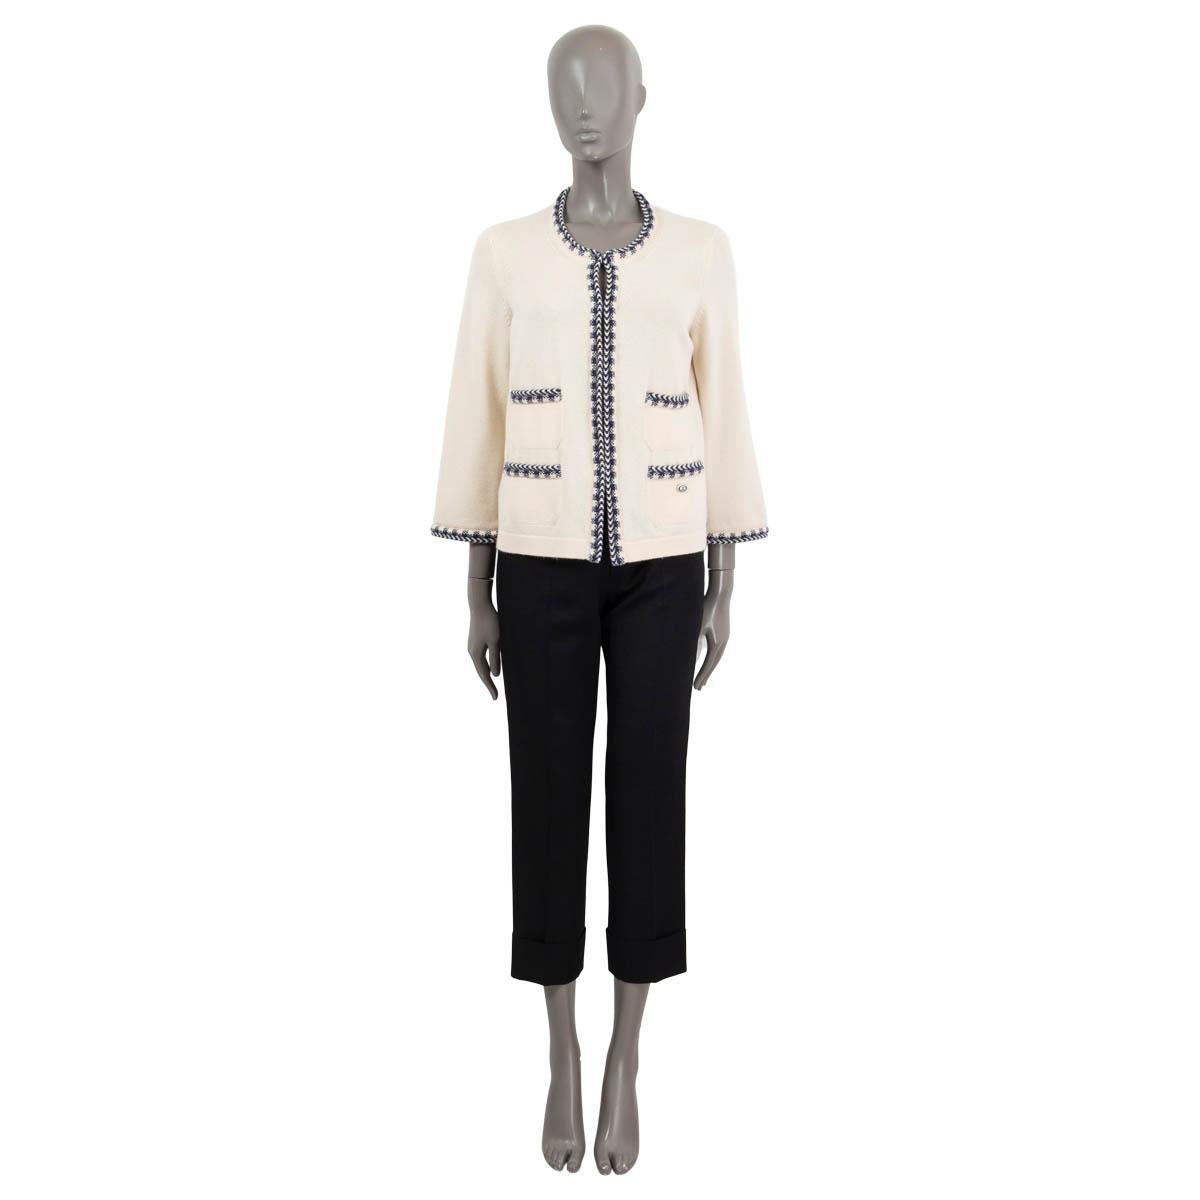 100% authentic Chanel four pocket cardigan in ivory cashmere (100%) with contrasting blue trim. Features a crewneck and 3/4 sleeves. Closes with hooks on the front. Has been worn and is in excellent condition.

2016 Paris-Seoul